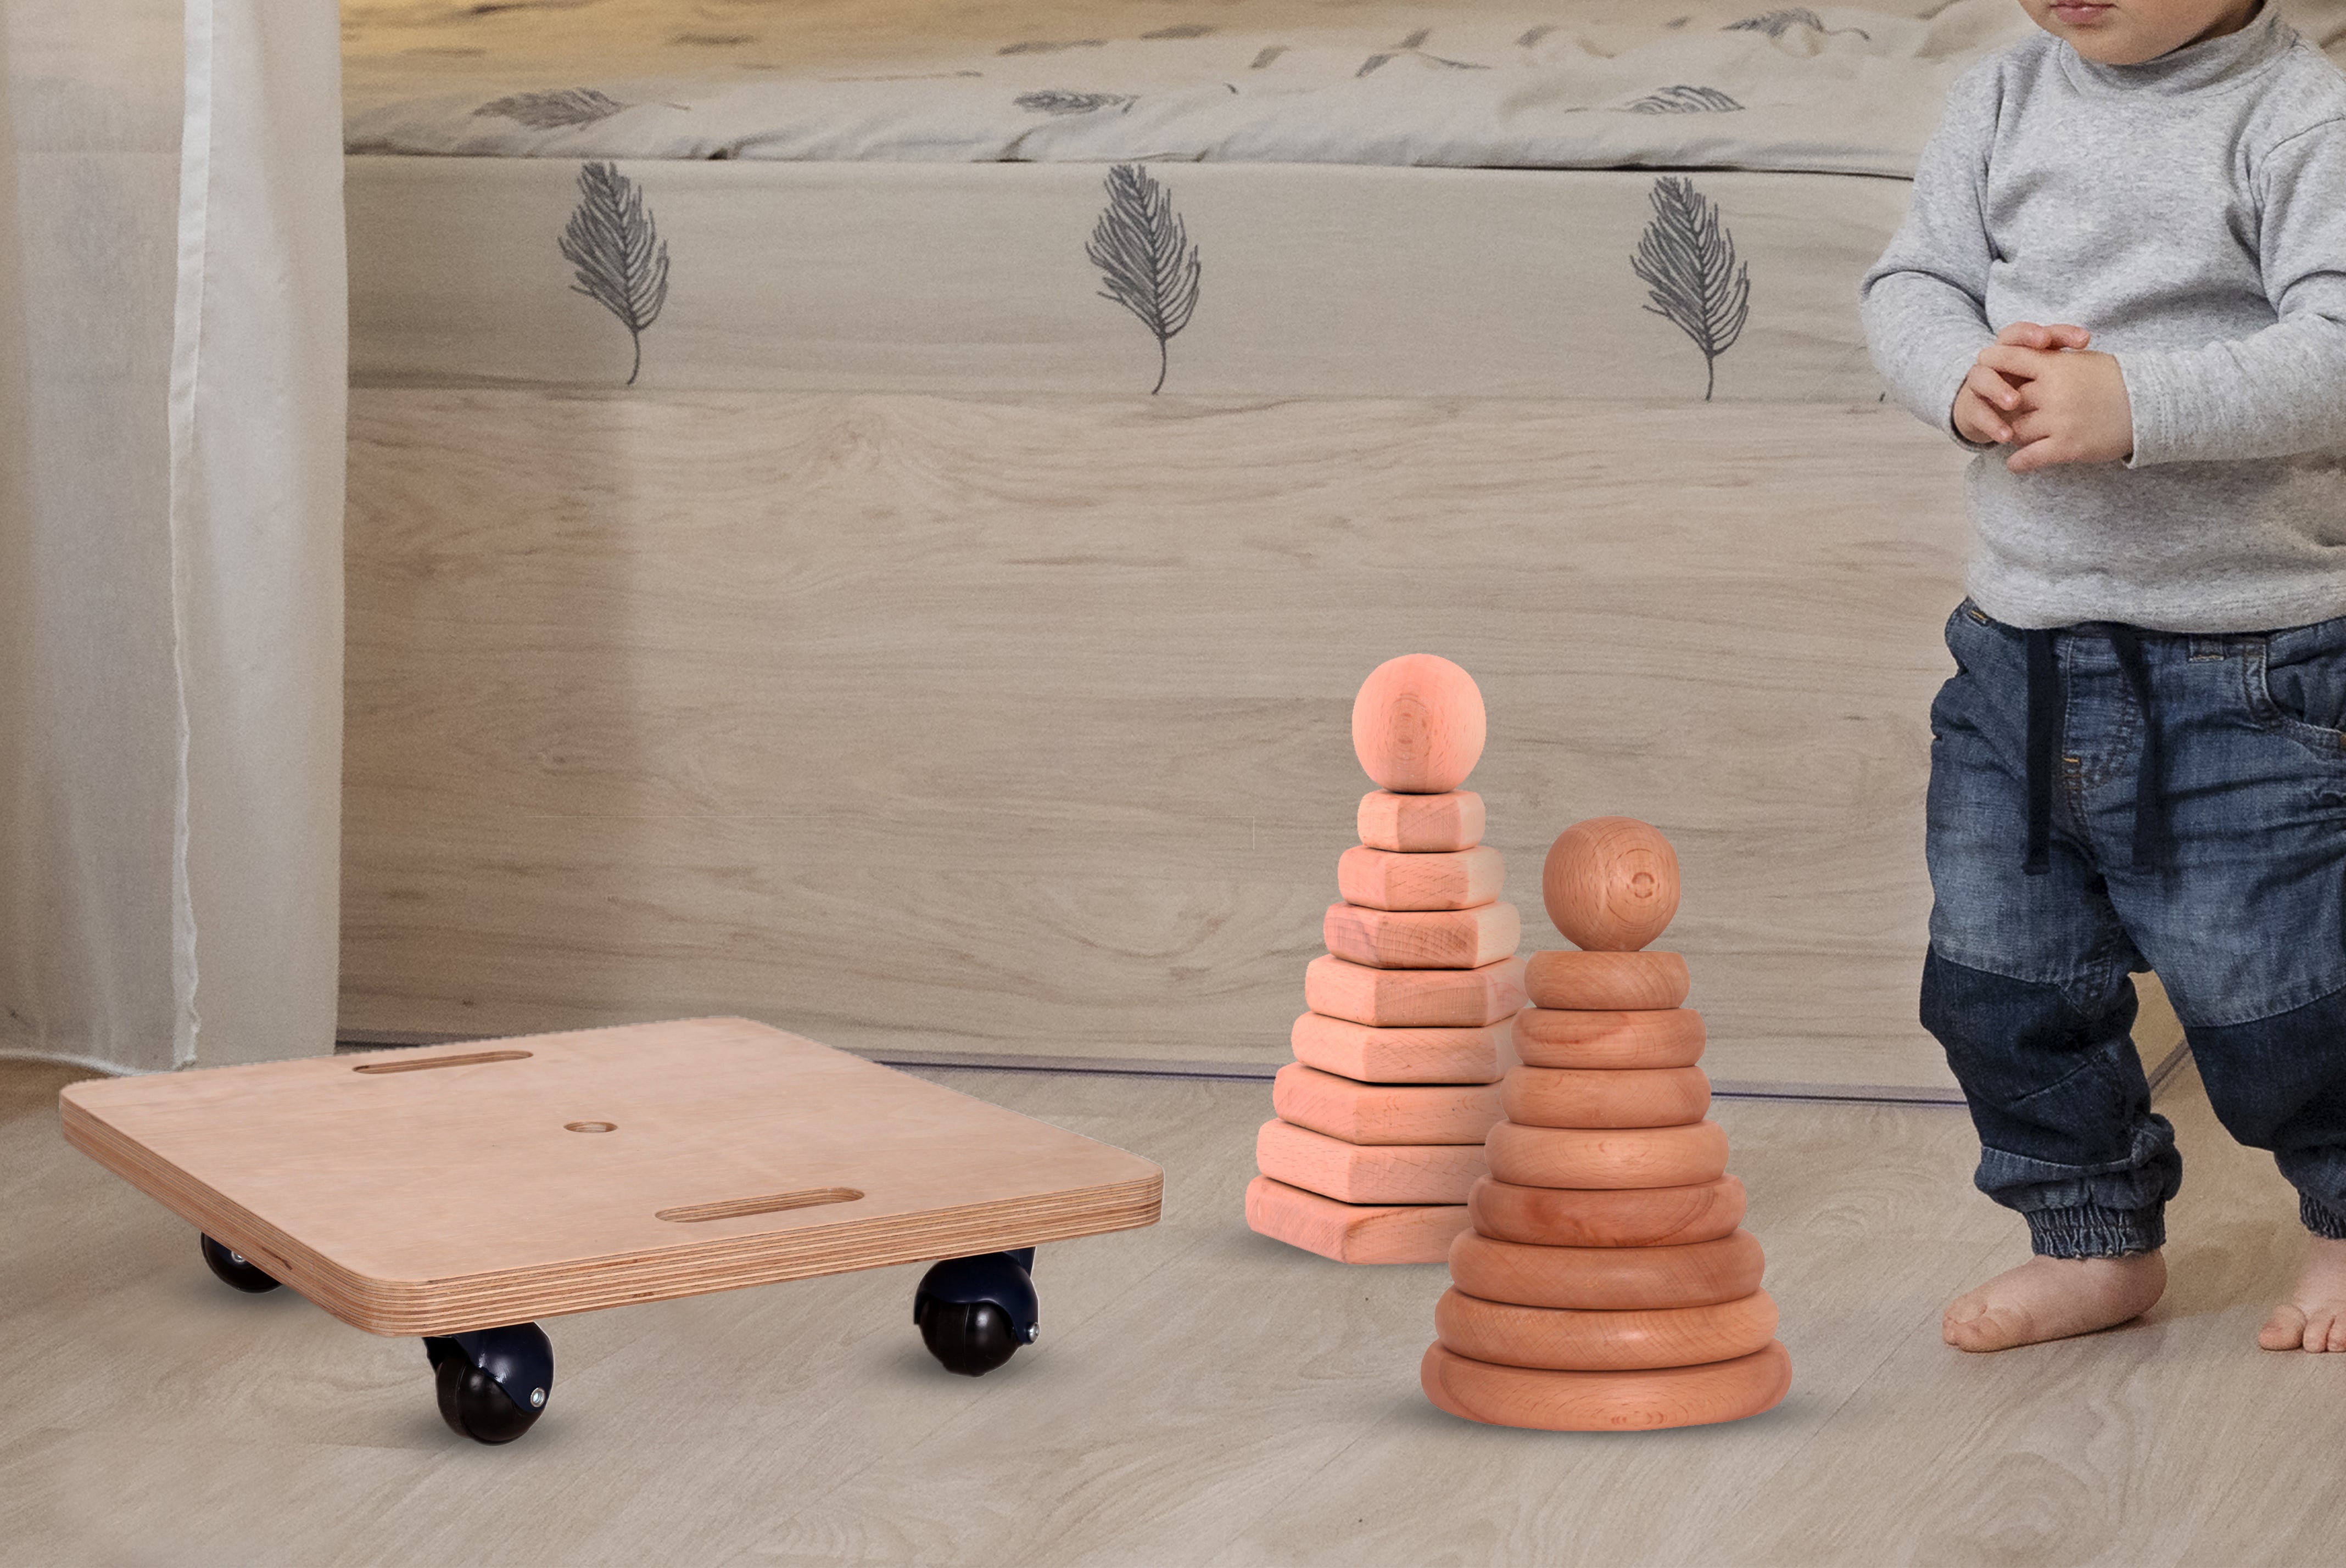 Why choose wooden toys over other materials?